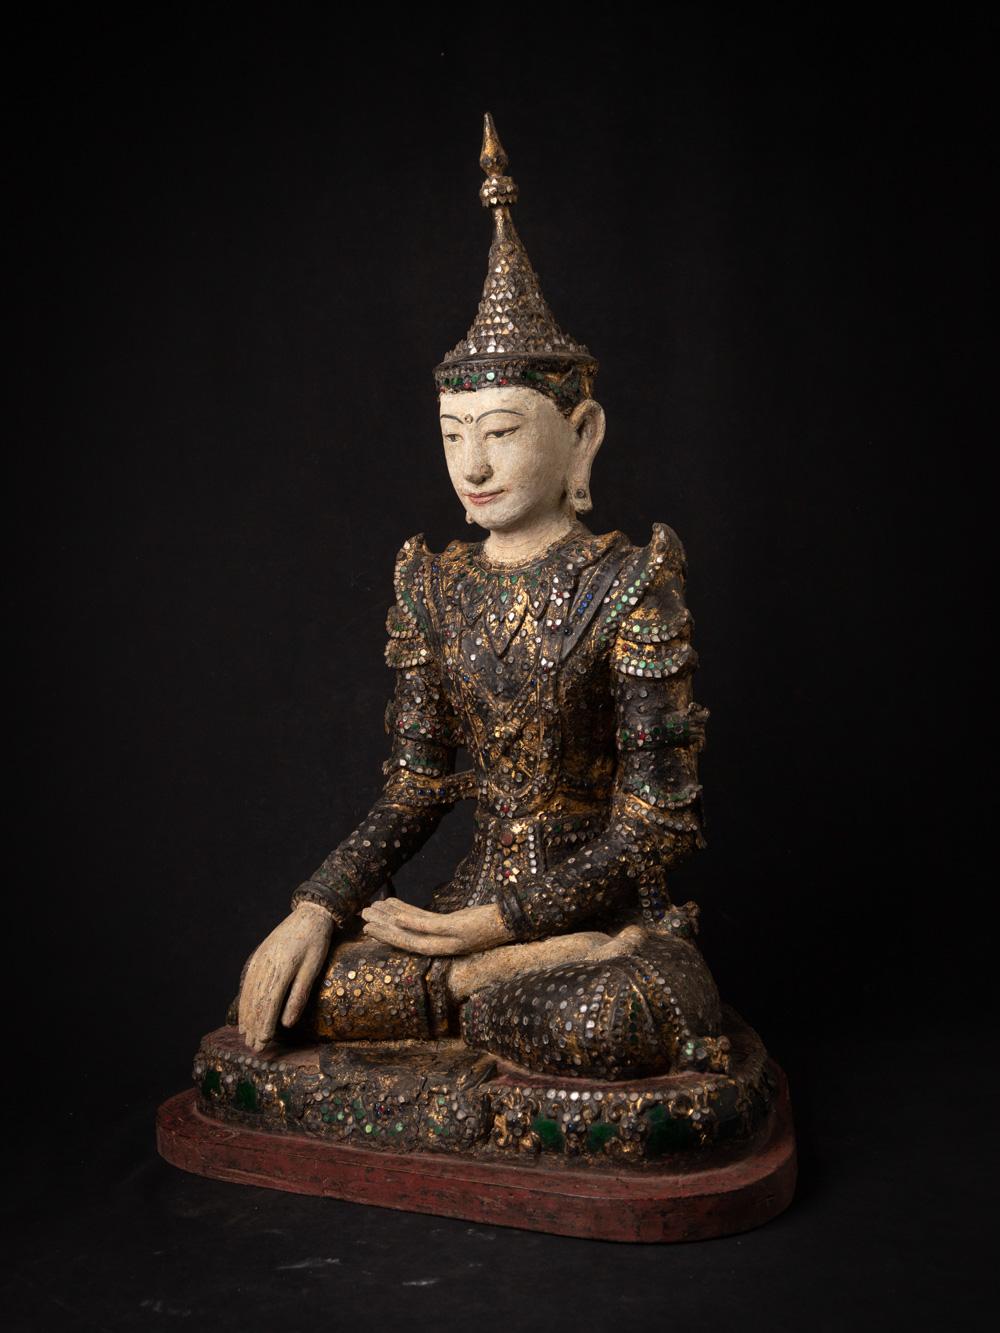 The antique wooden Burmese Buddha statue is a magnificent and historically significant artifact originating from Burma. Crafted from wood, this statue stands at an impressive 74 cm in height and measures 49.5 cm in width and 37.5 cm in depth. The